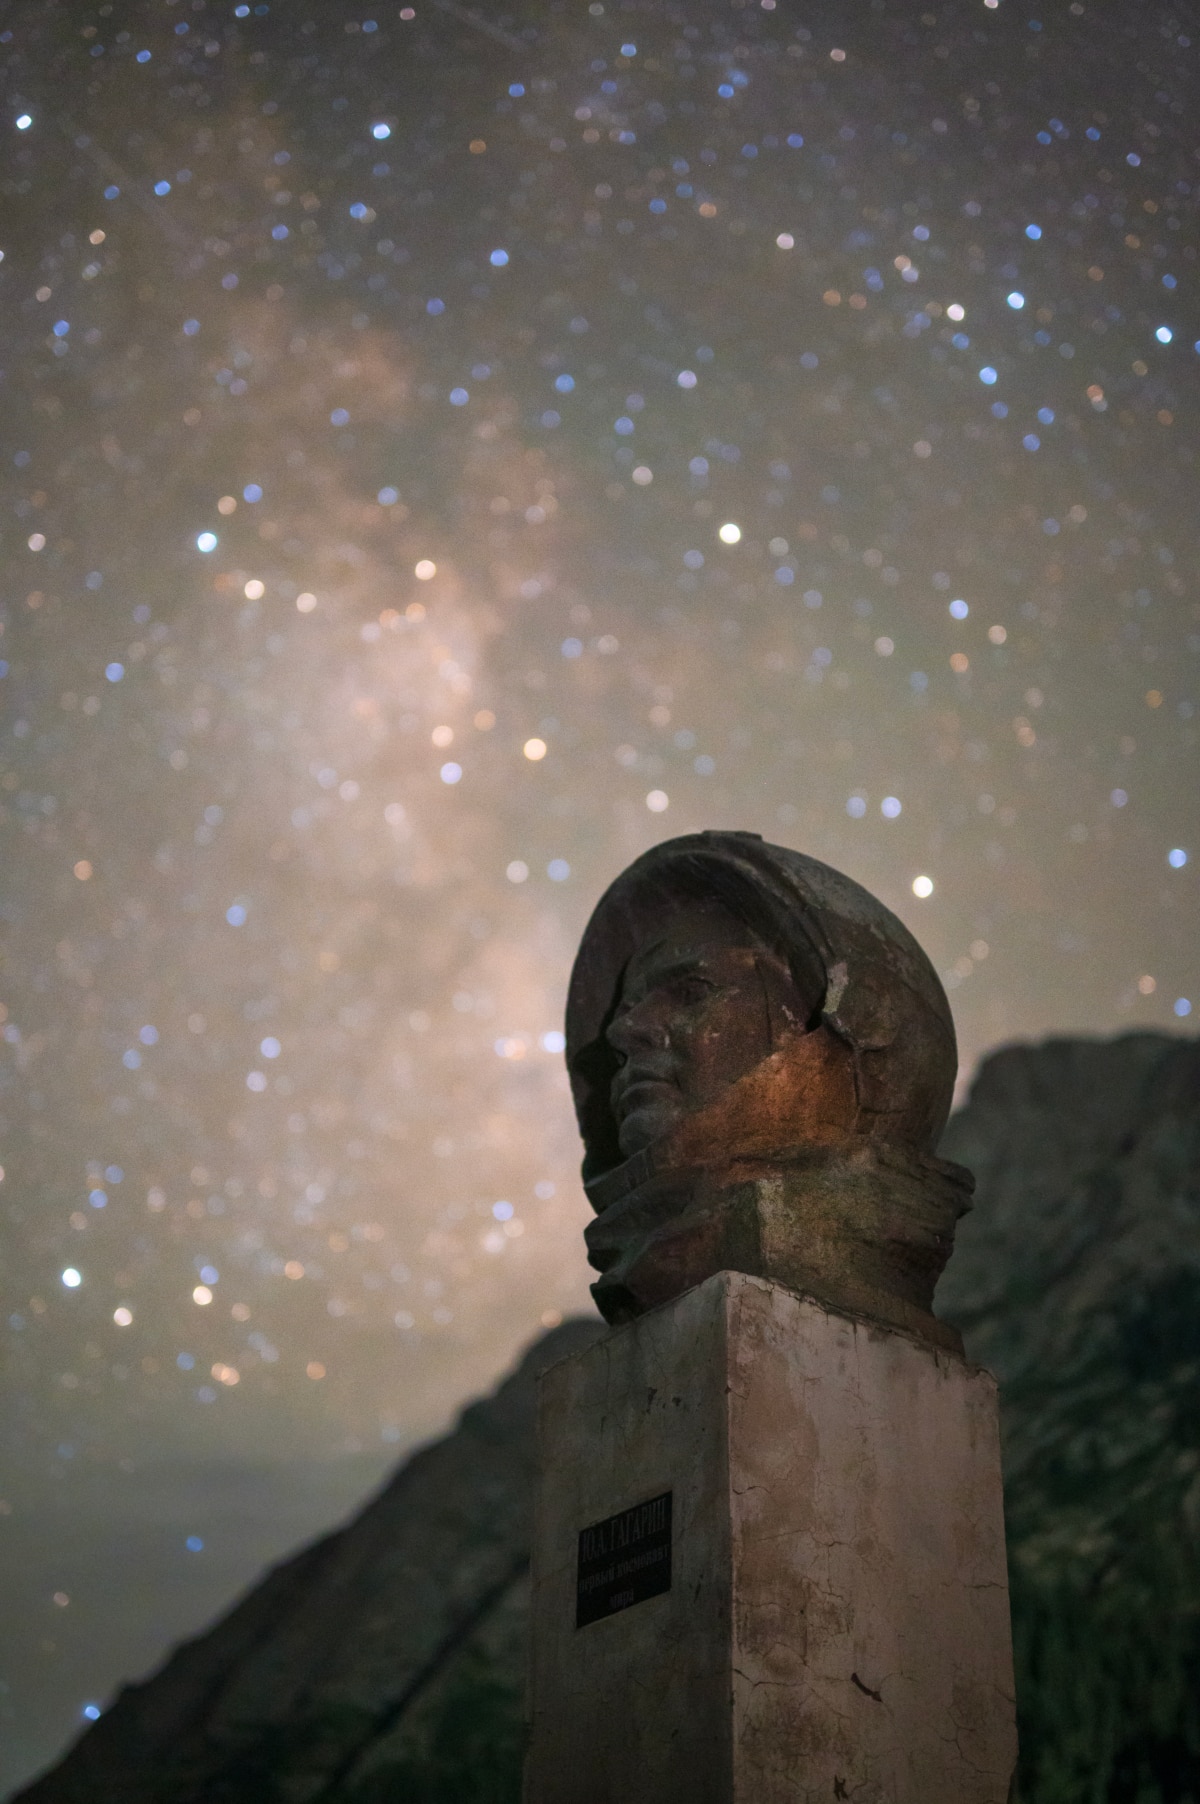 Gagarin Statue Close up with stars in the background in Kyrgyzstan